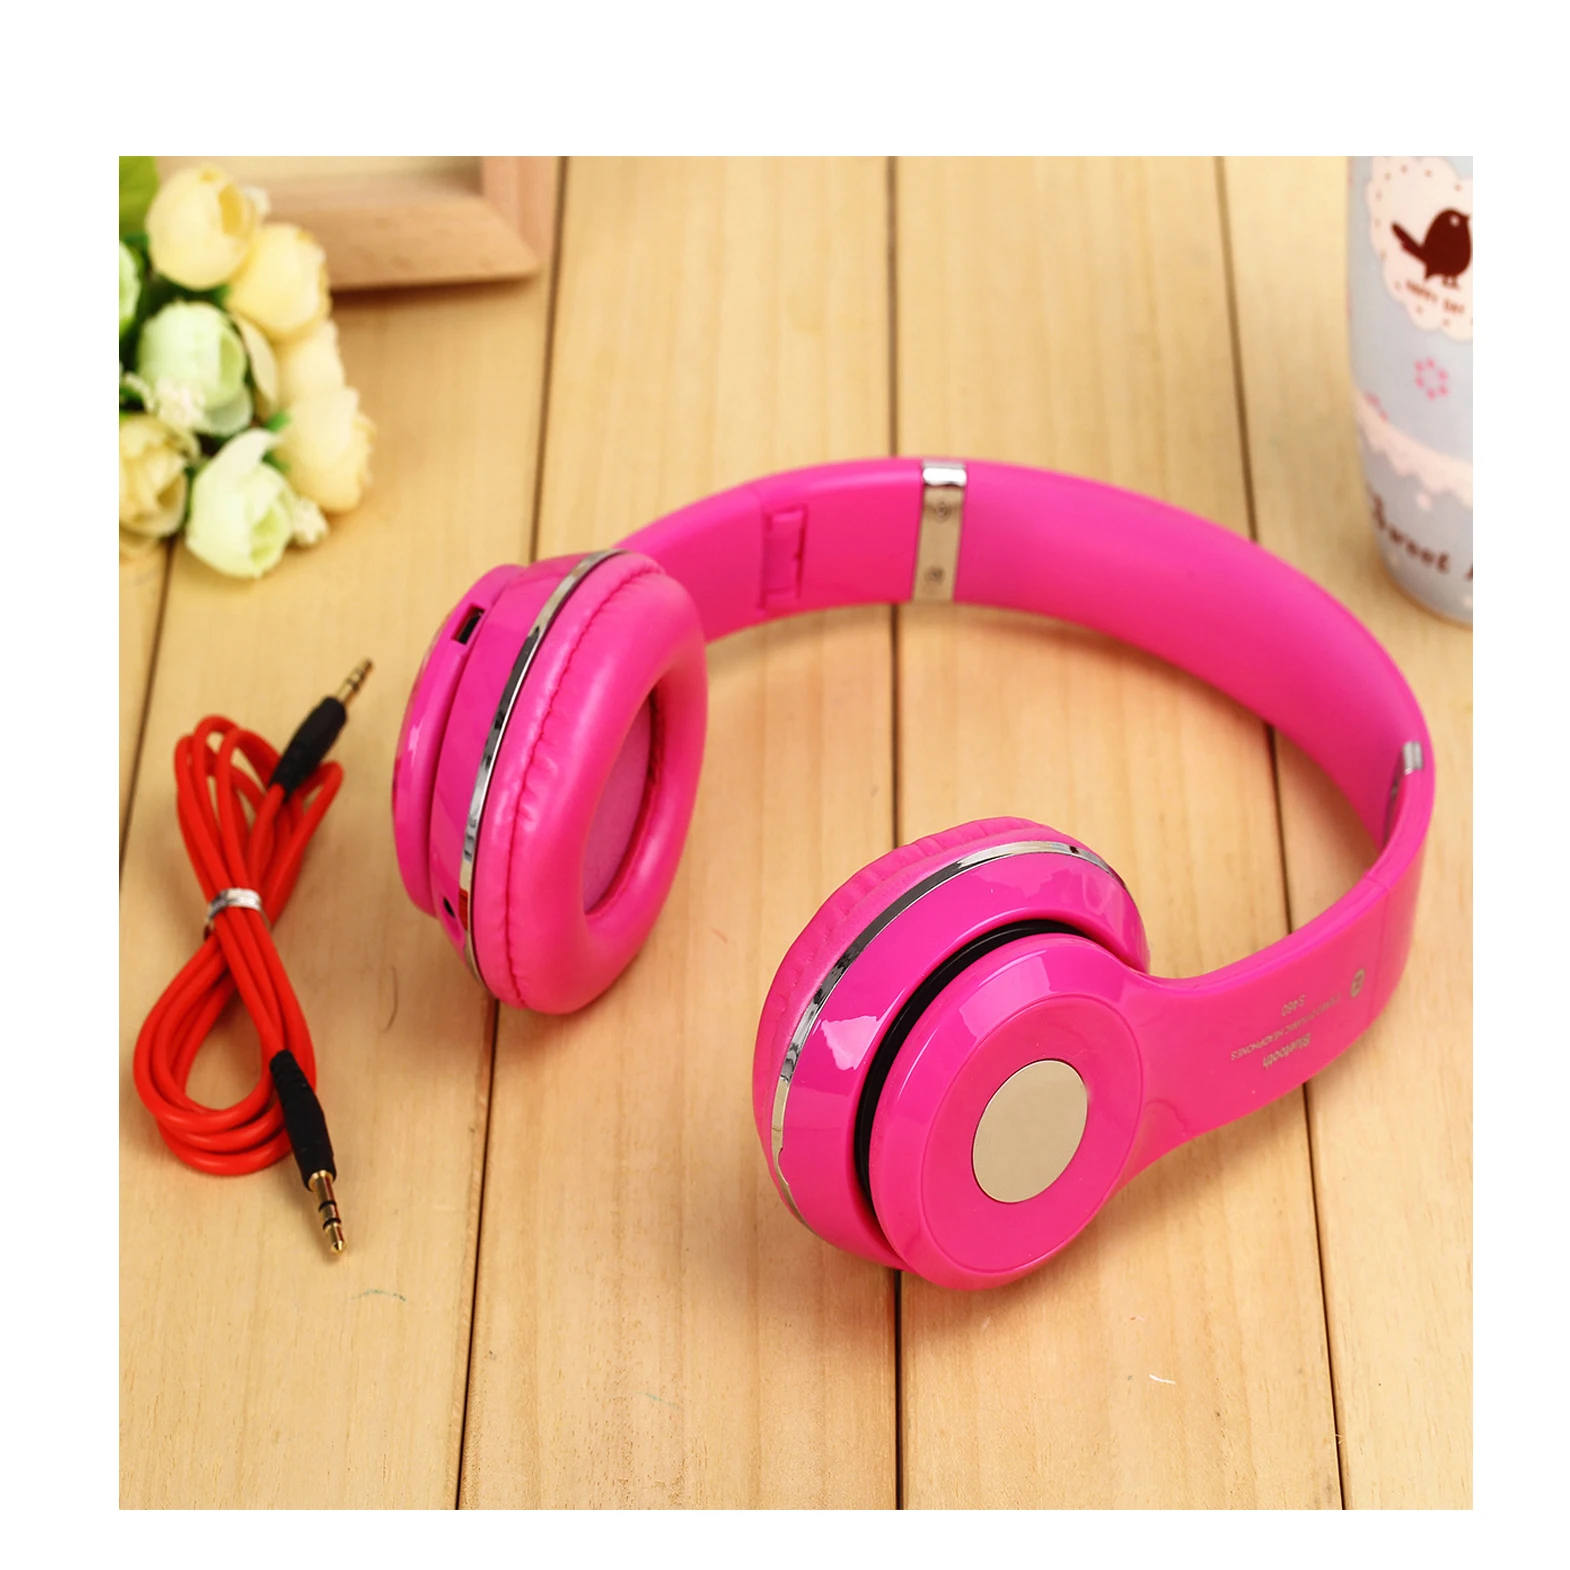 

FB-S460 ANC noise cancelling video songs HD458BT gamming headset earphone earbuds wireless headphones